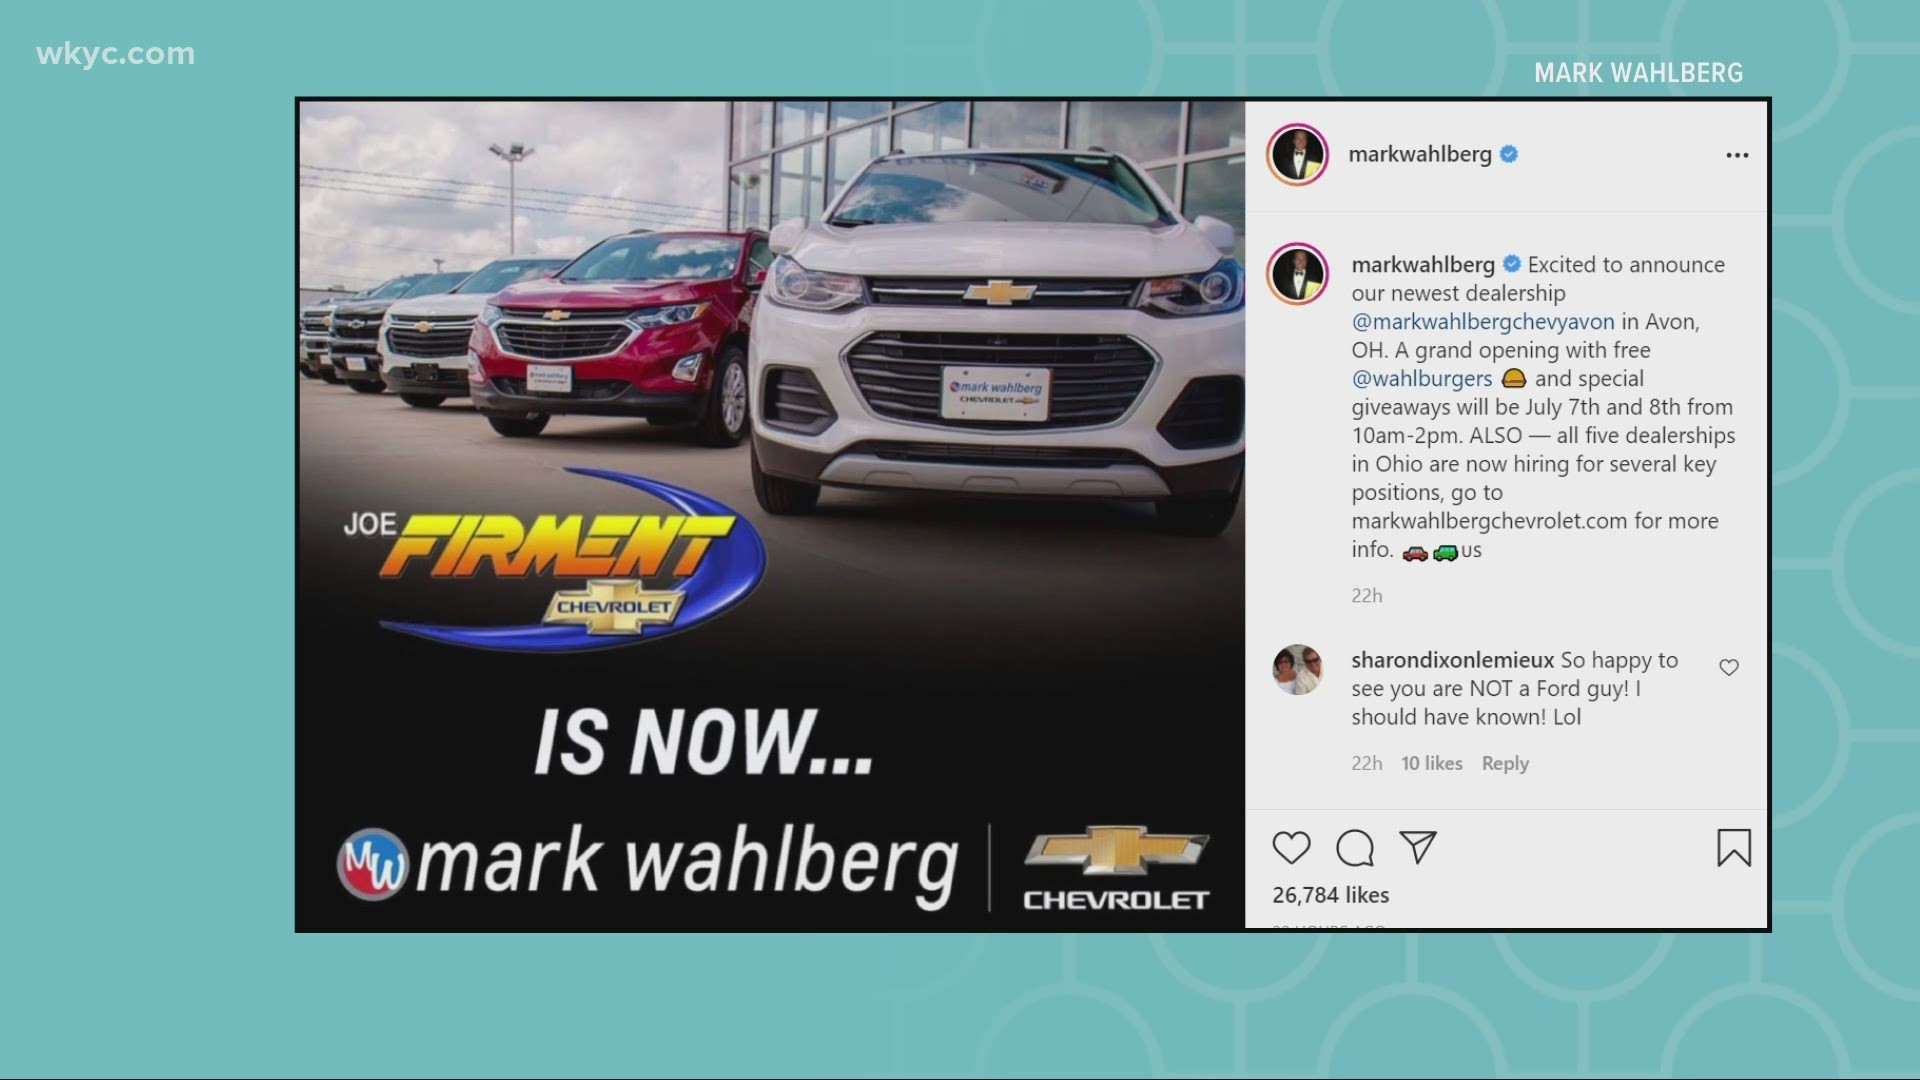 Lorain County's Joe Firment Chevrolet is now owned by actor Mark Wahlberg! The actor announced the news in an Instagram post Wednesday.